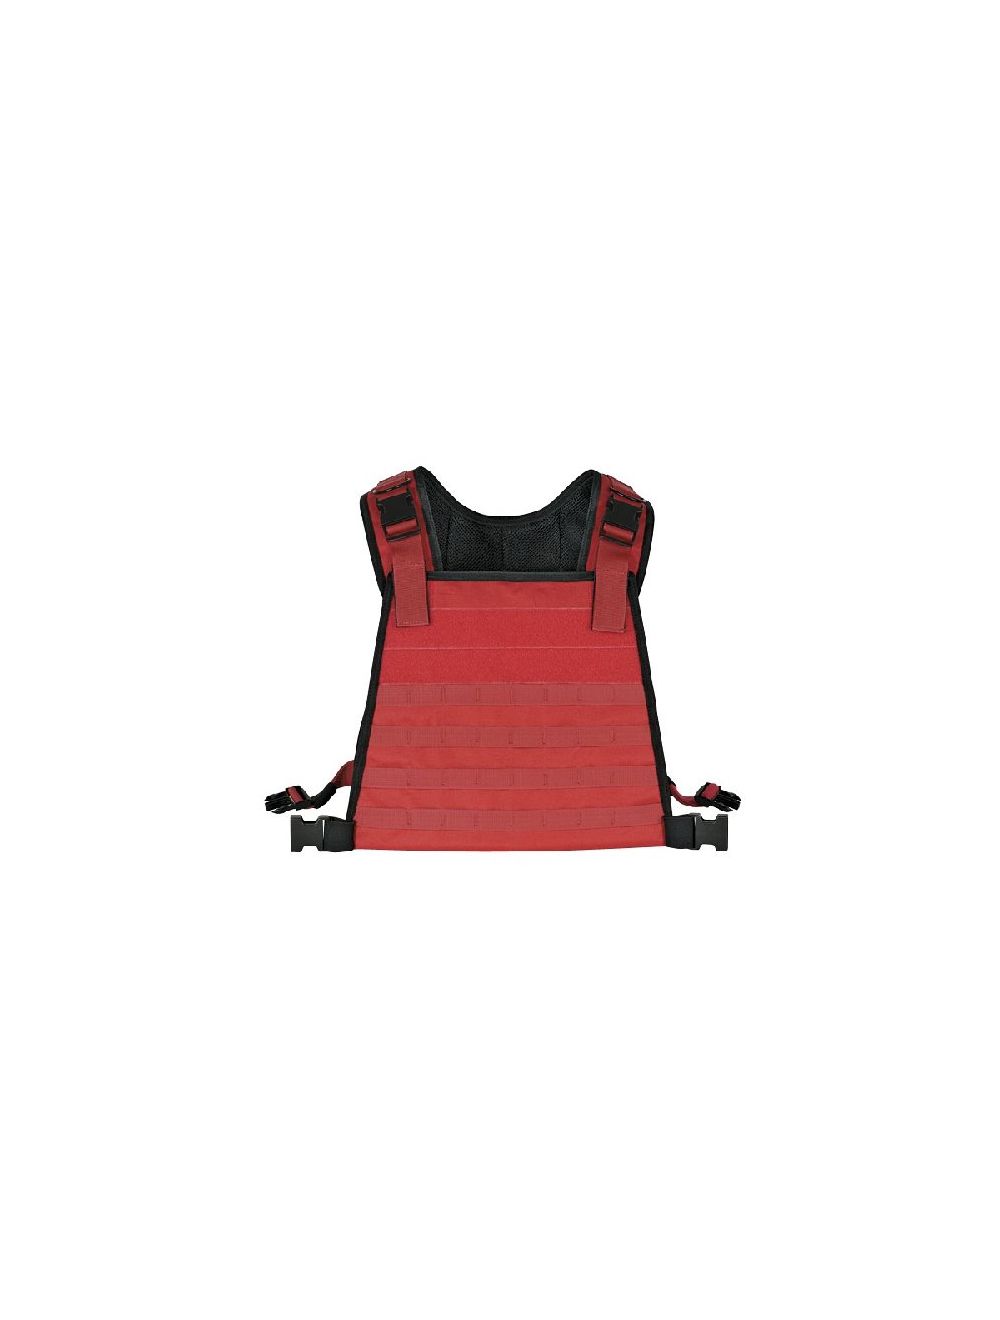 Instructor High Visibility Plate Carrier